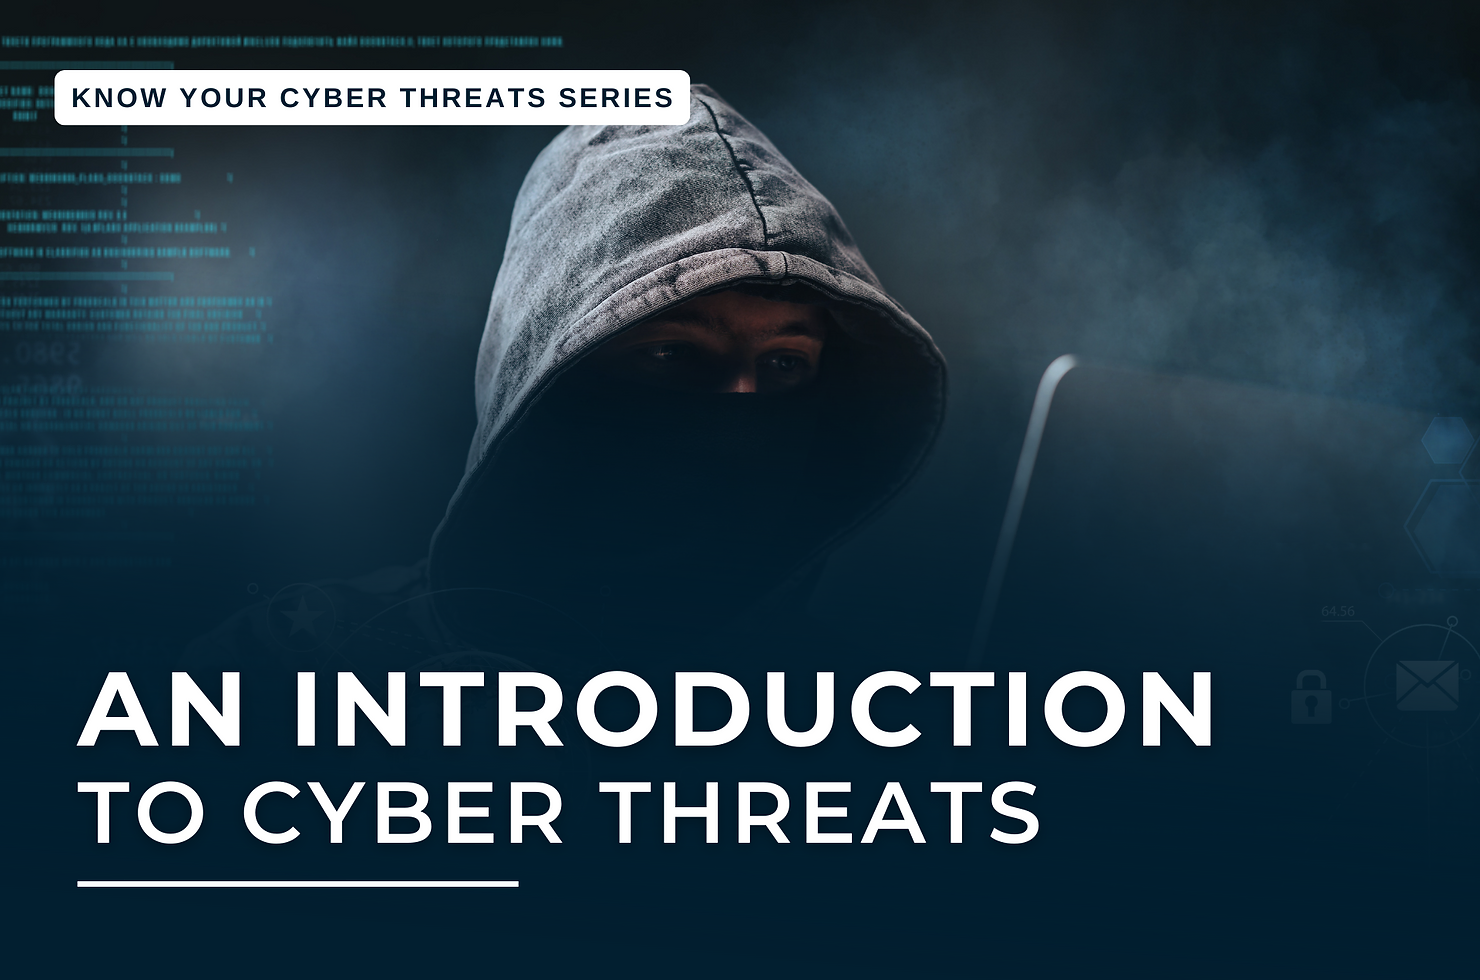 AN INTRODUCTION TO CYBER THREATS